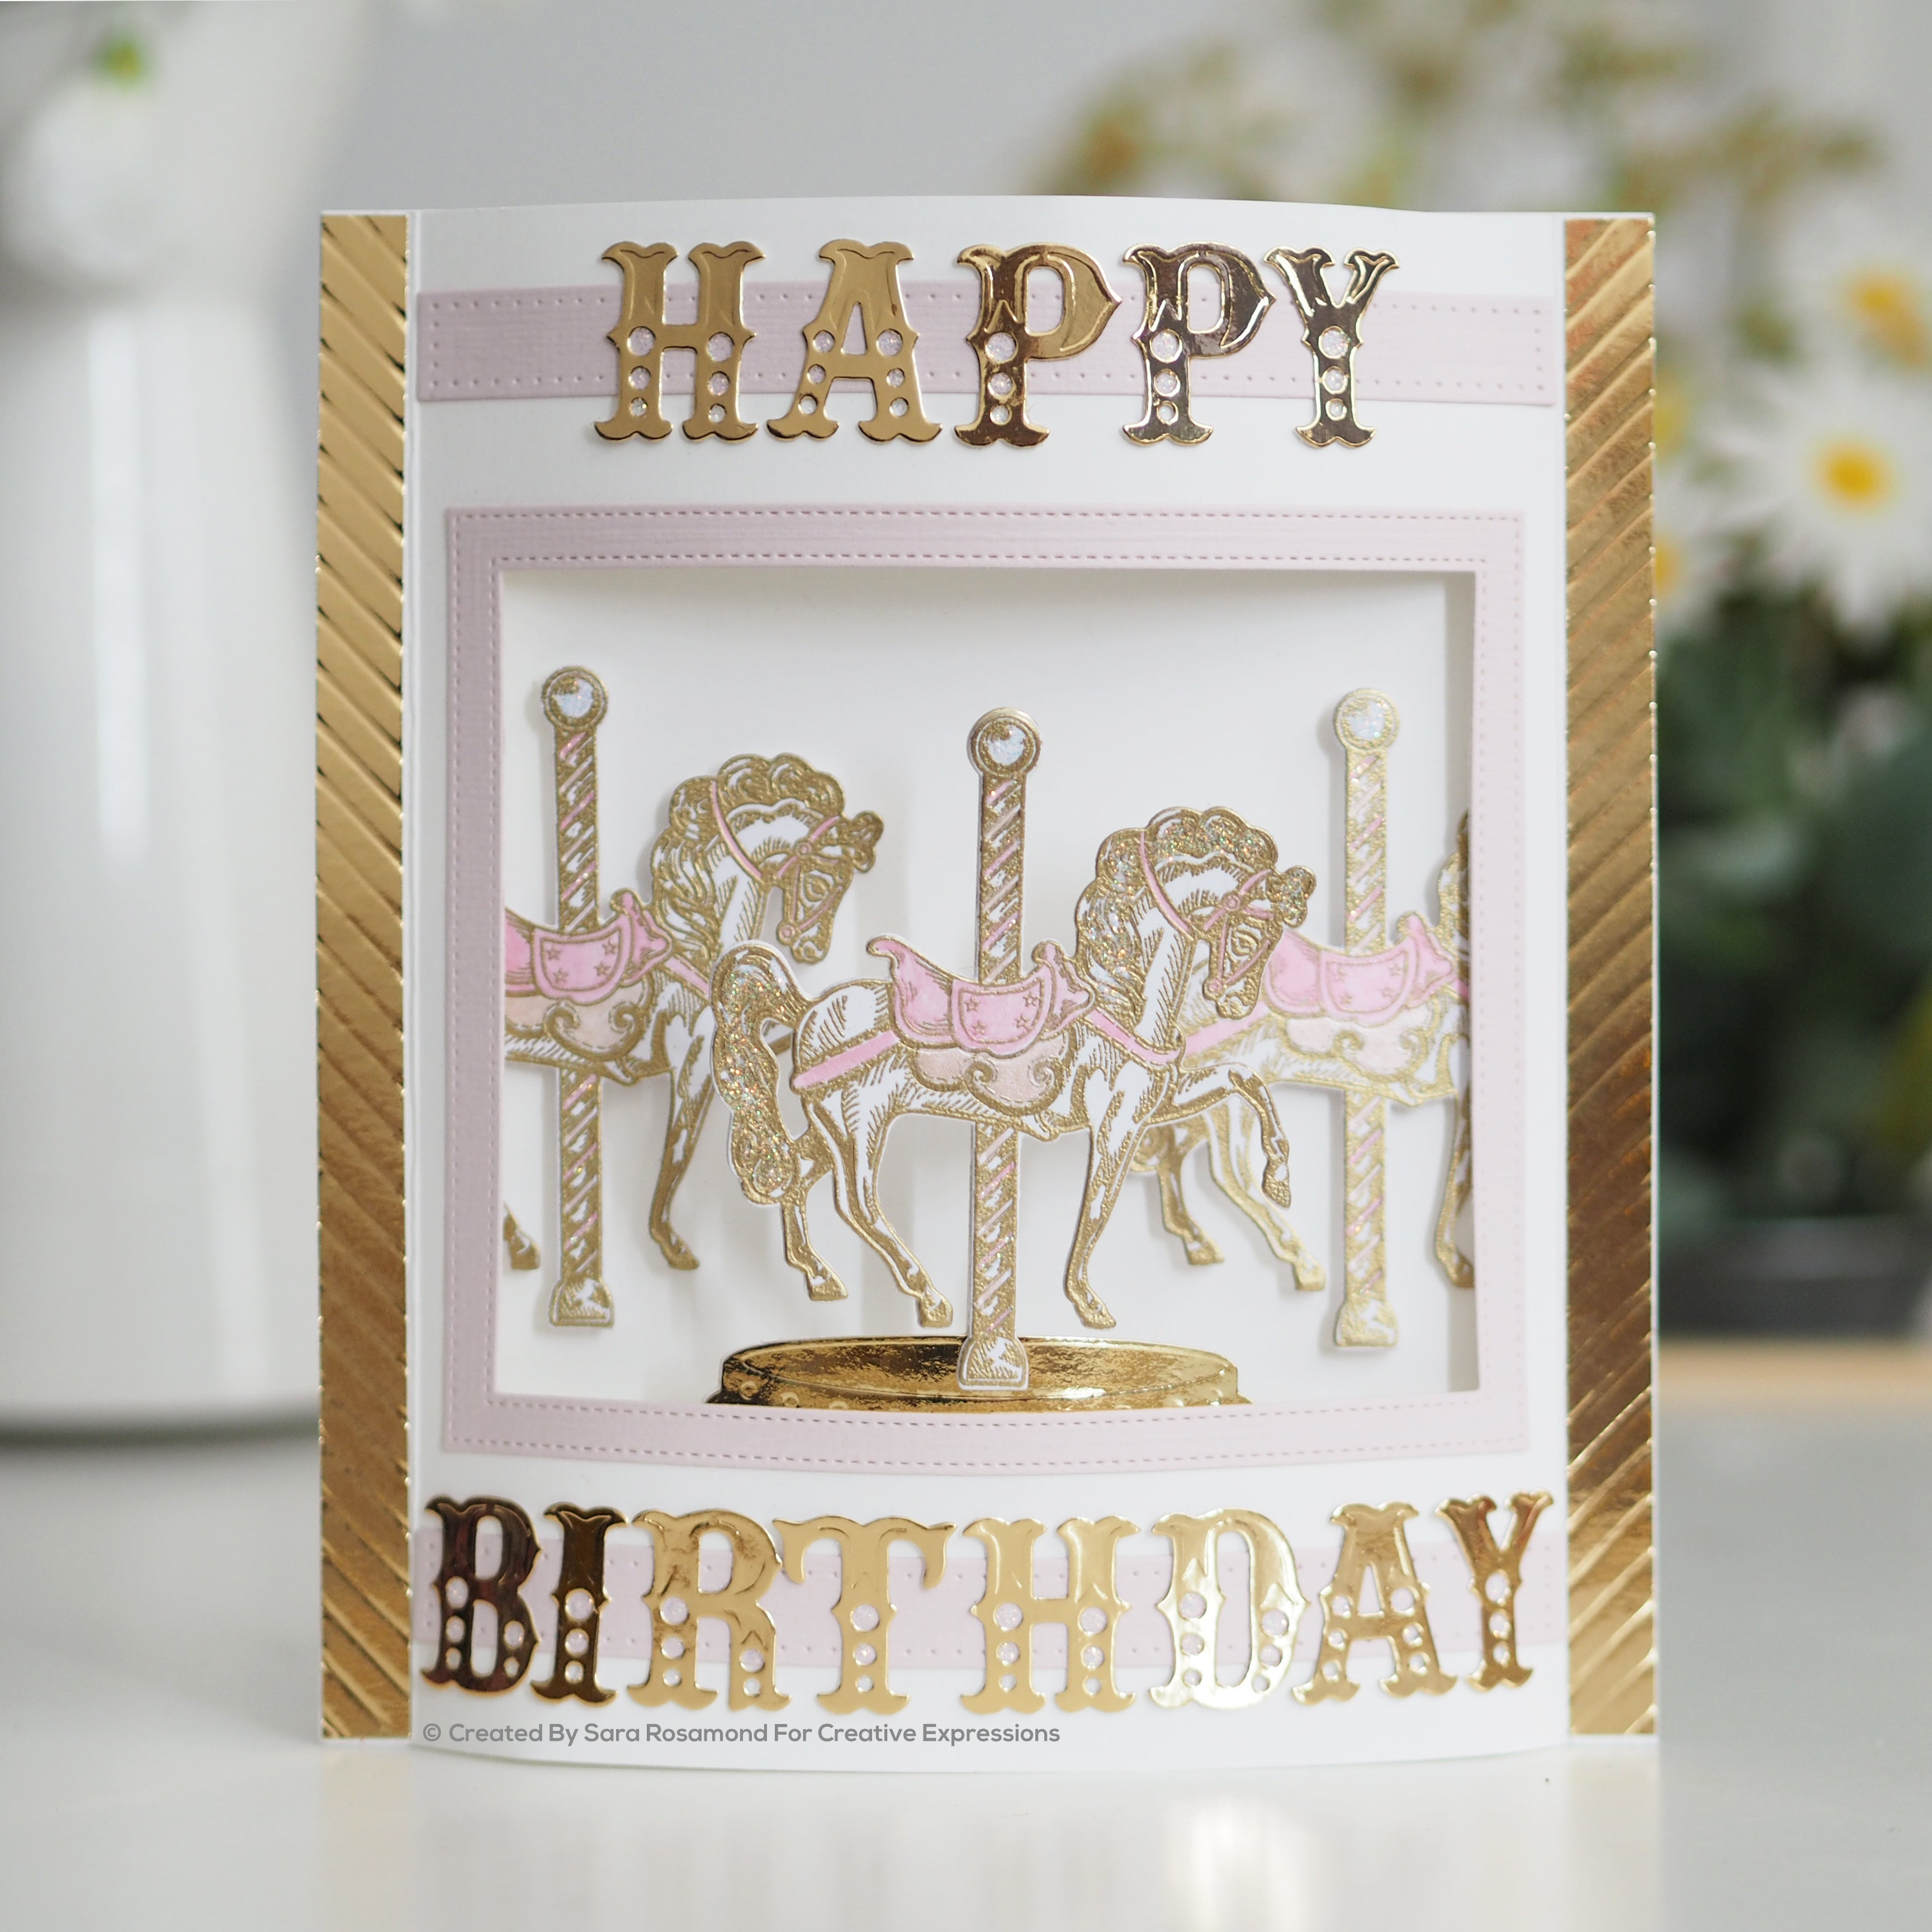 Carousel Horses Clear Stamp and Cutting Dies for Card Making,diy